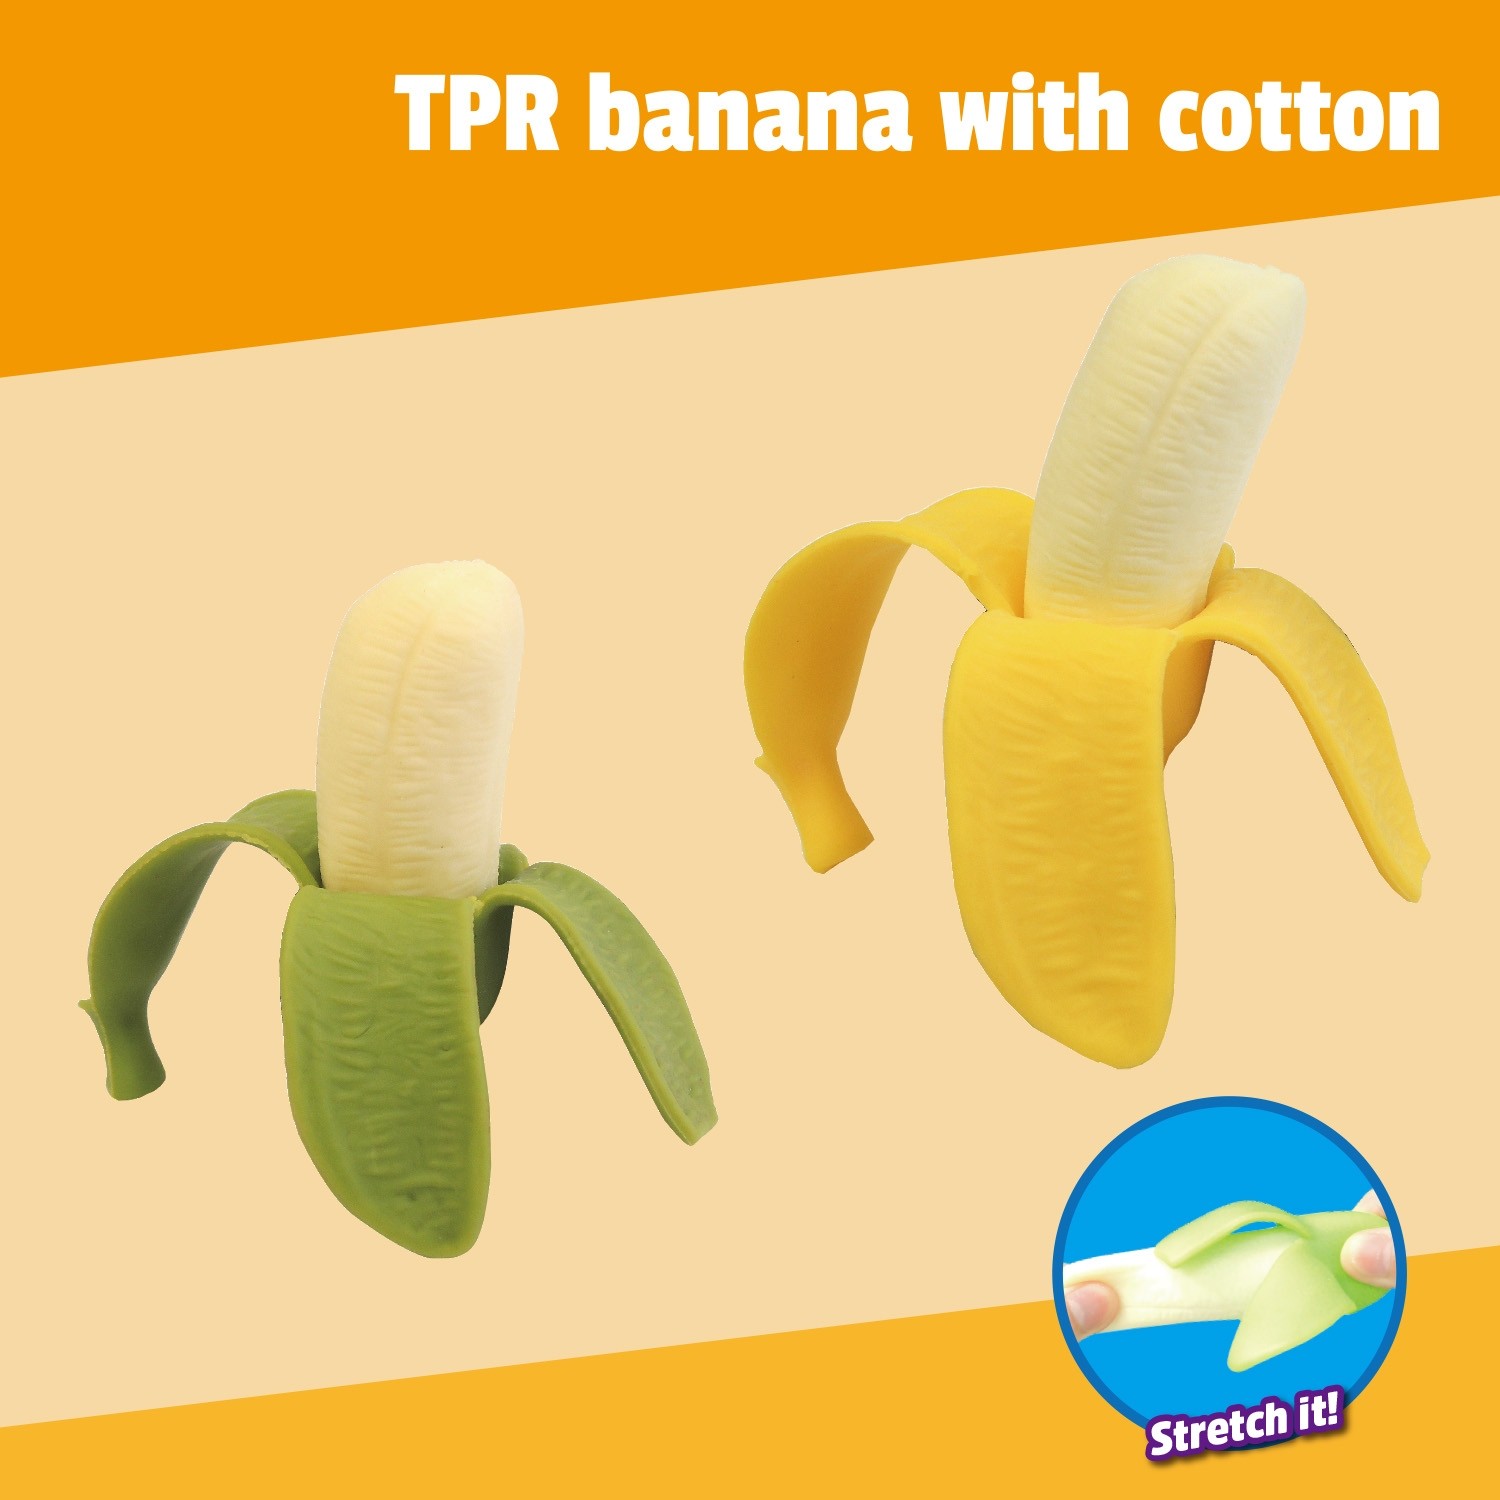 TPR banana with cotton